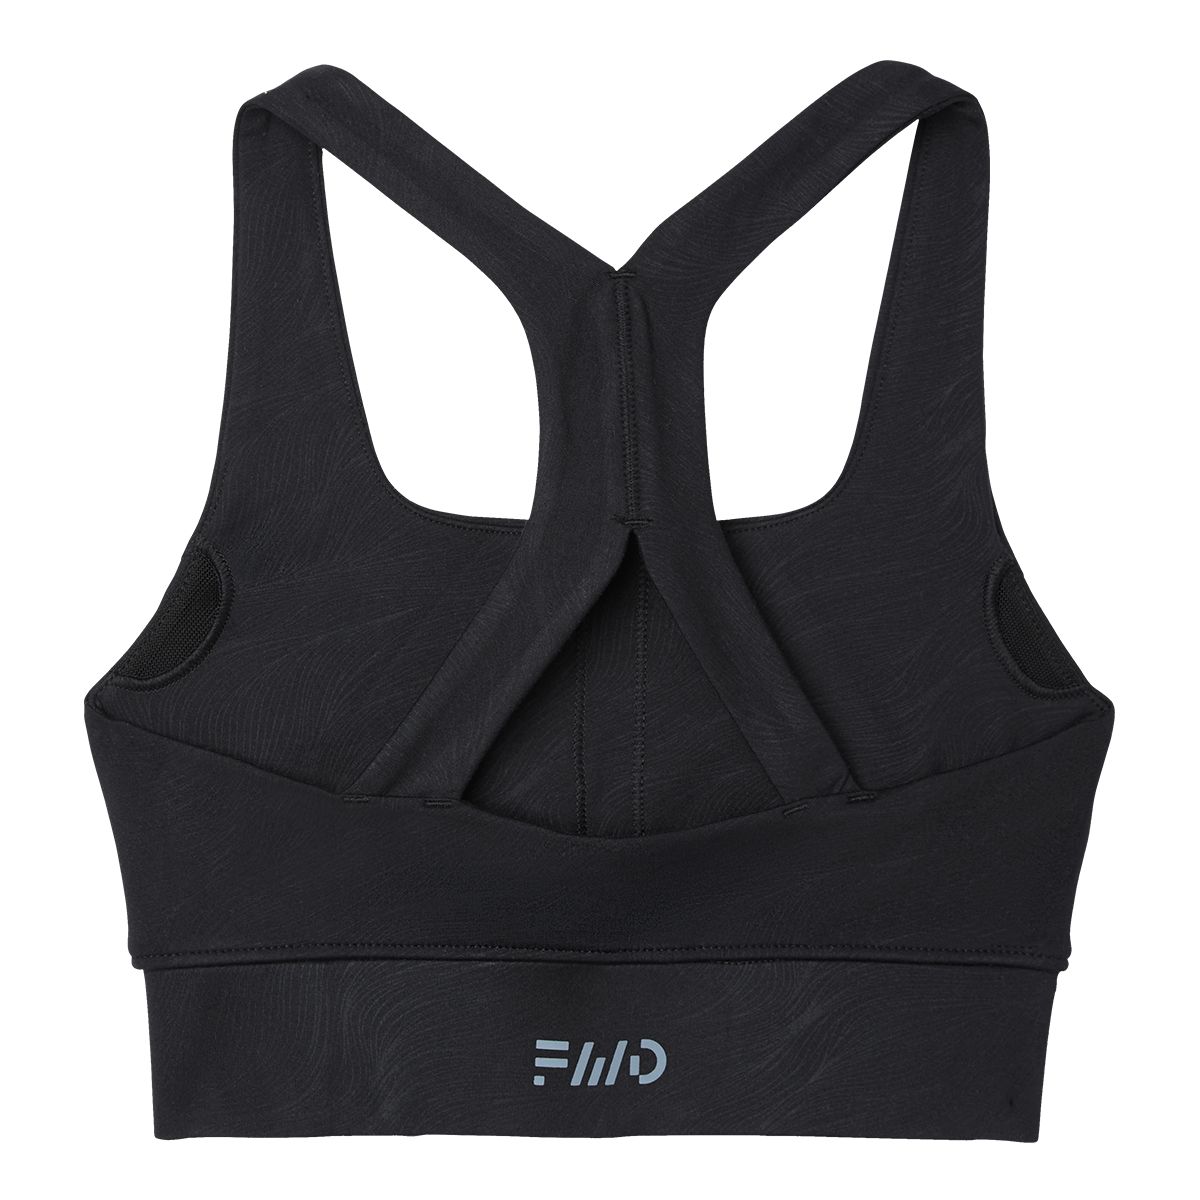 https://media-www.sportchek.ca/product/div-03-softgoods/dpt-70-athletic-clothing/sdpt-02-womens/334128825/fwd-women-s-core-low-sports-bra-ae05b4d6-49d8-4b9b-9fd5-e6013d79e531-jpgrendition.jpg?imdensity=1&imwidth=1244&impolicy=mZoom